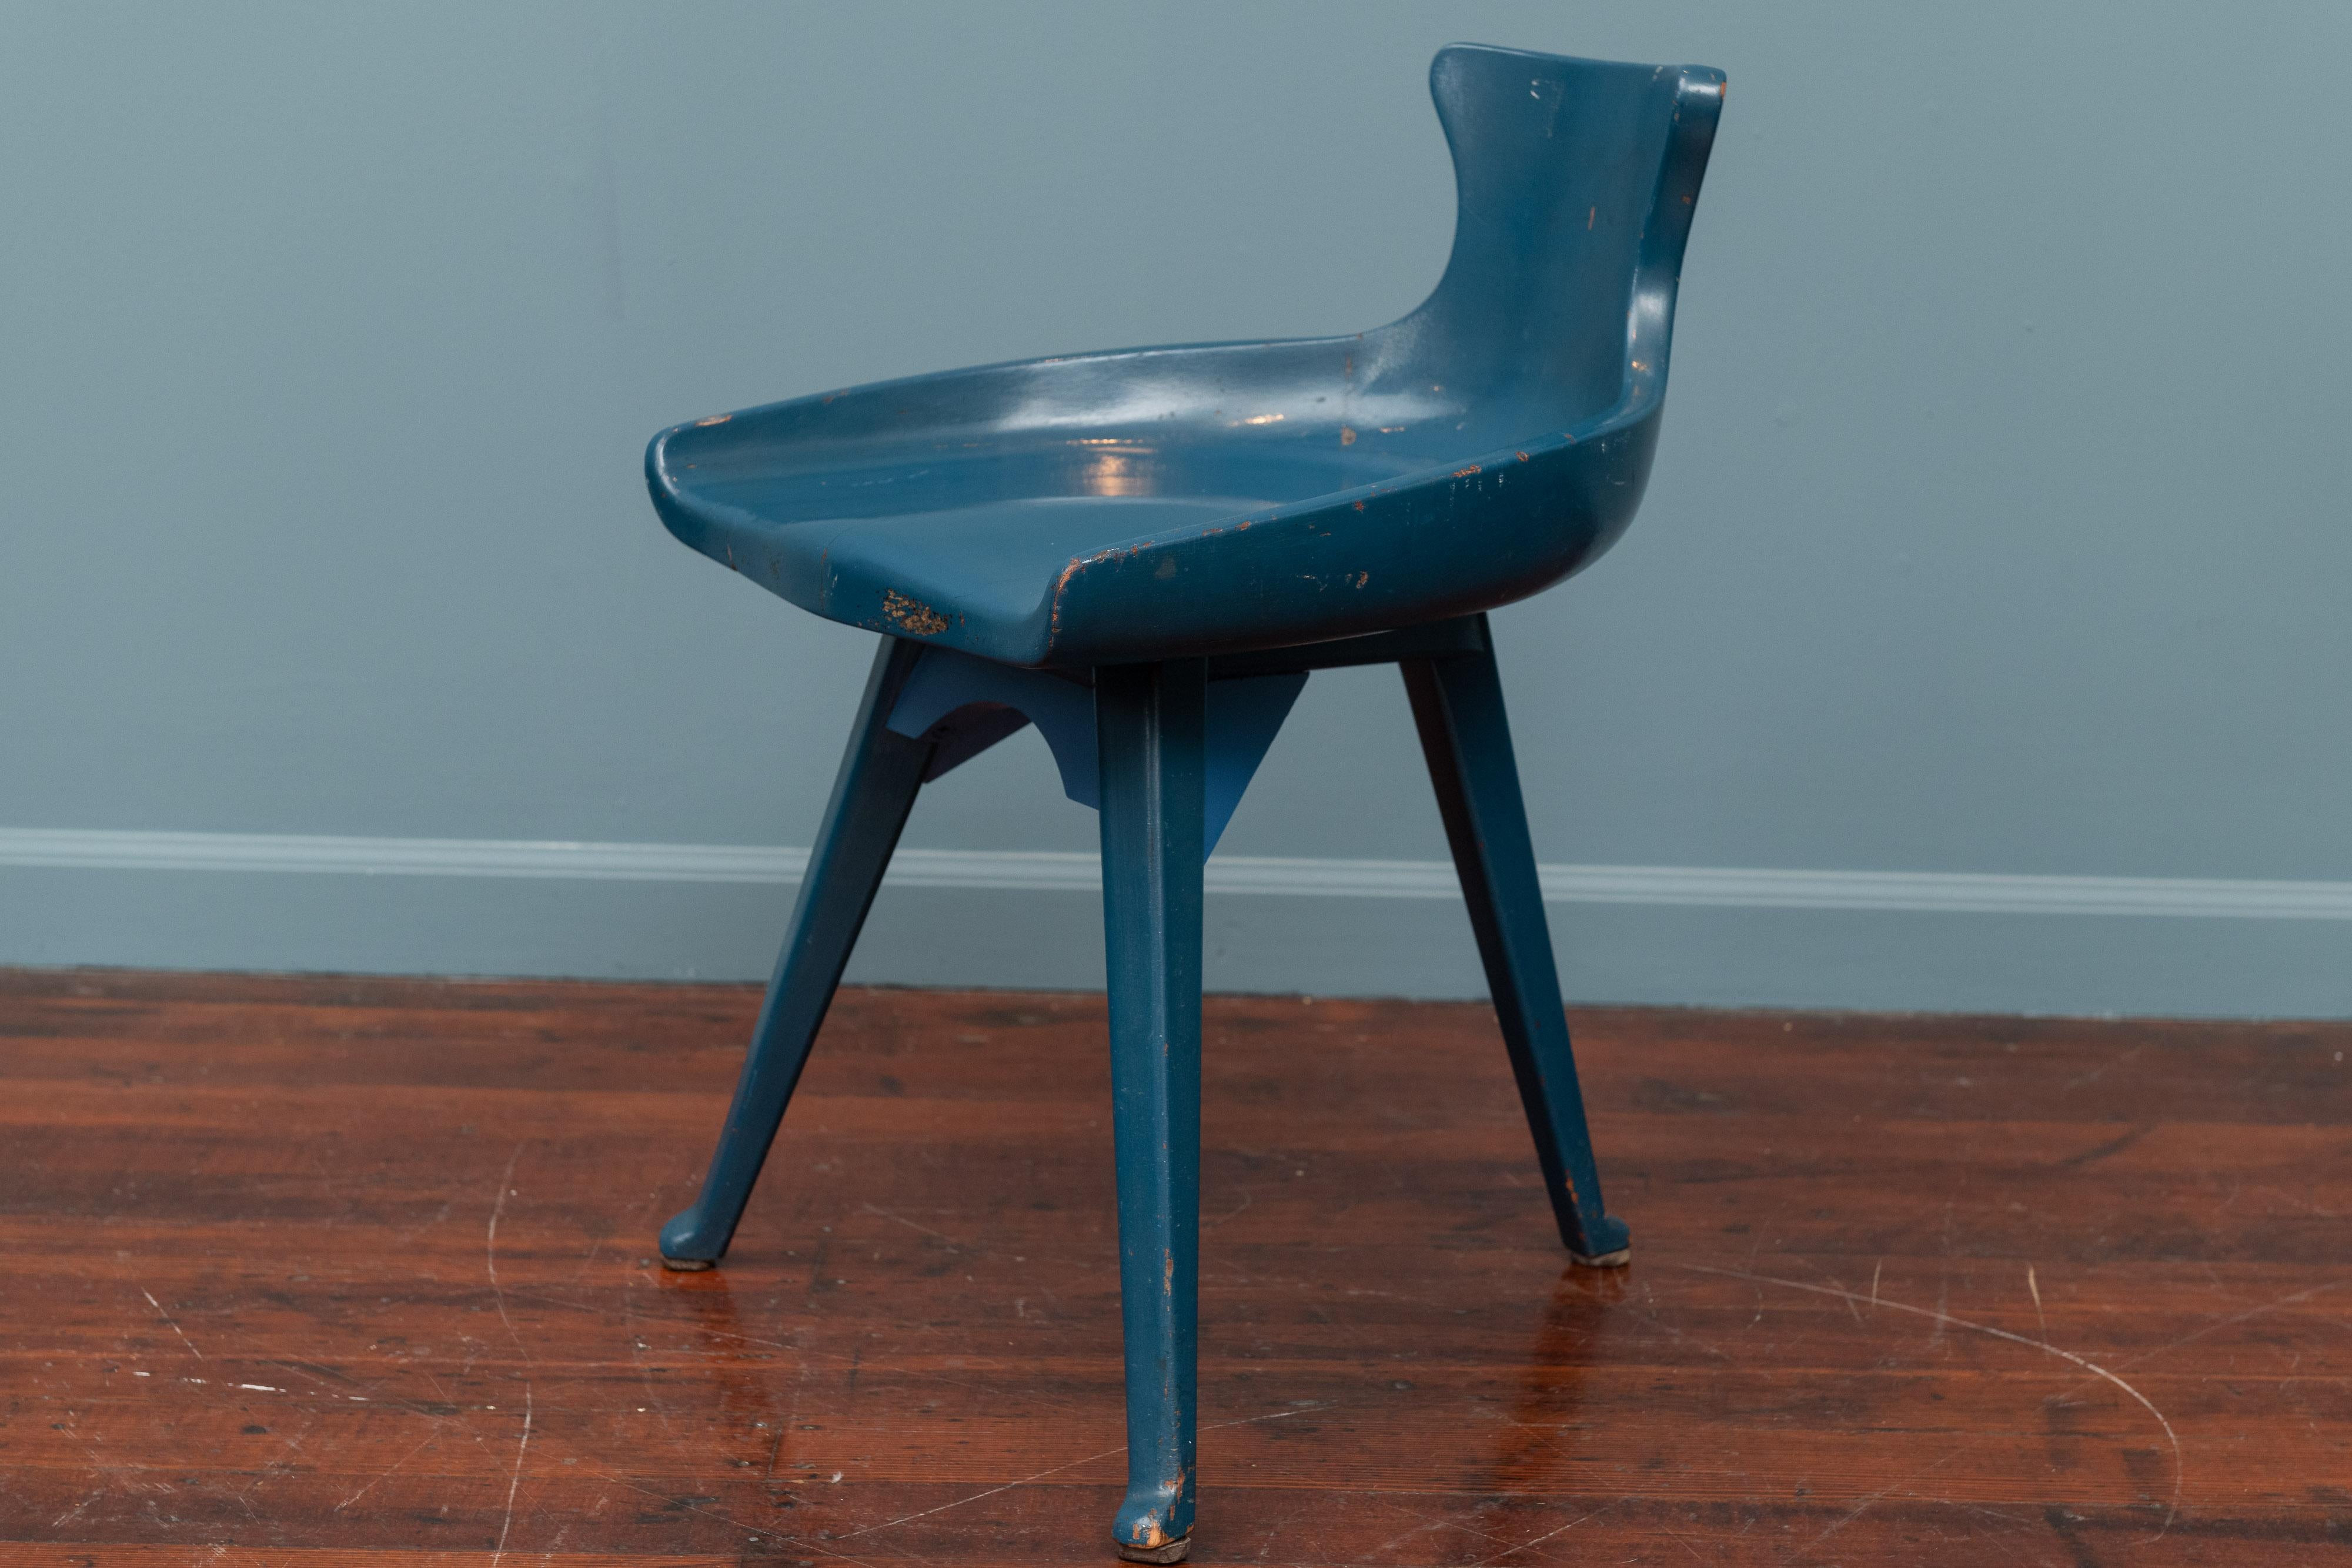 Unusual Folk Art chair by Altamira, Italy. Painted blue at some point with added leg supports but charming nonetheless.